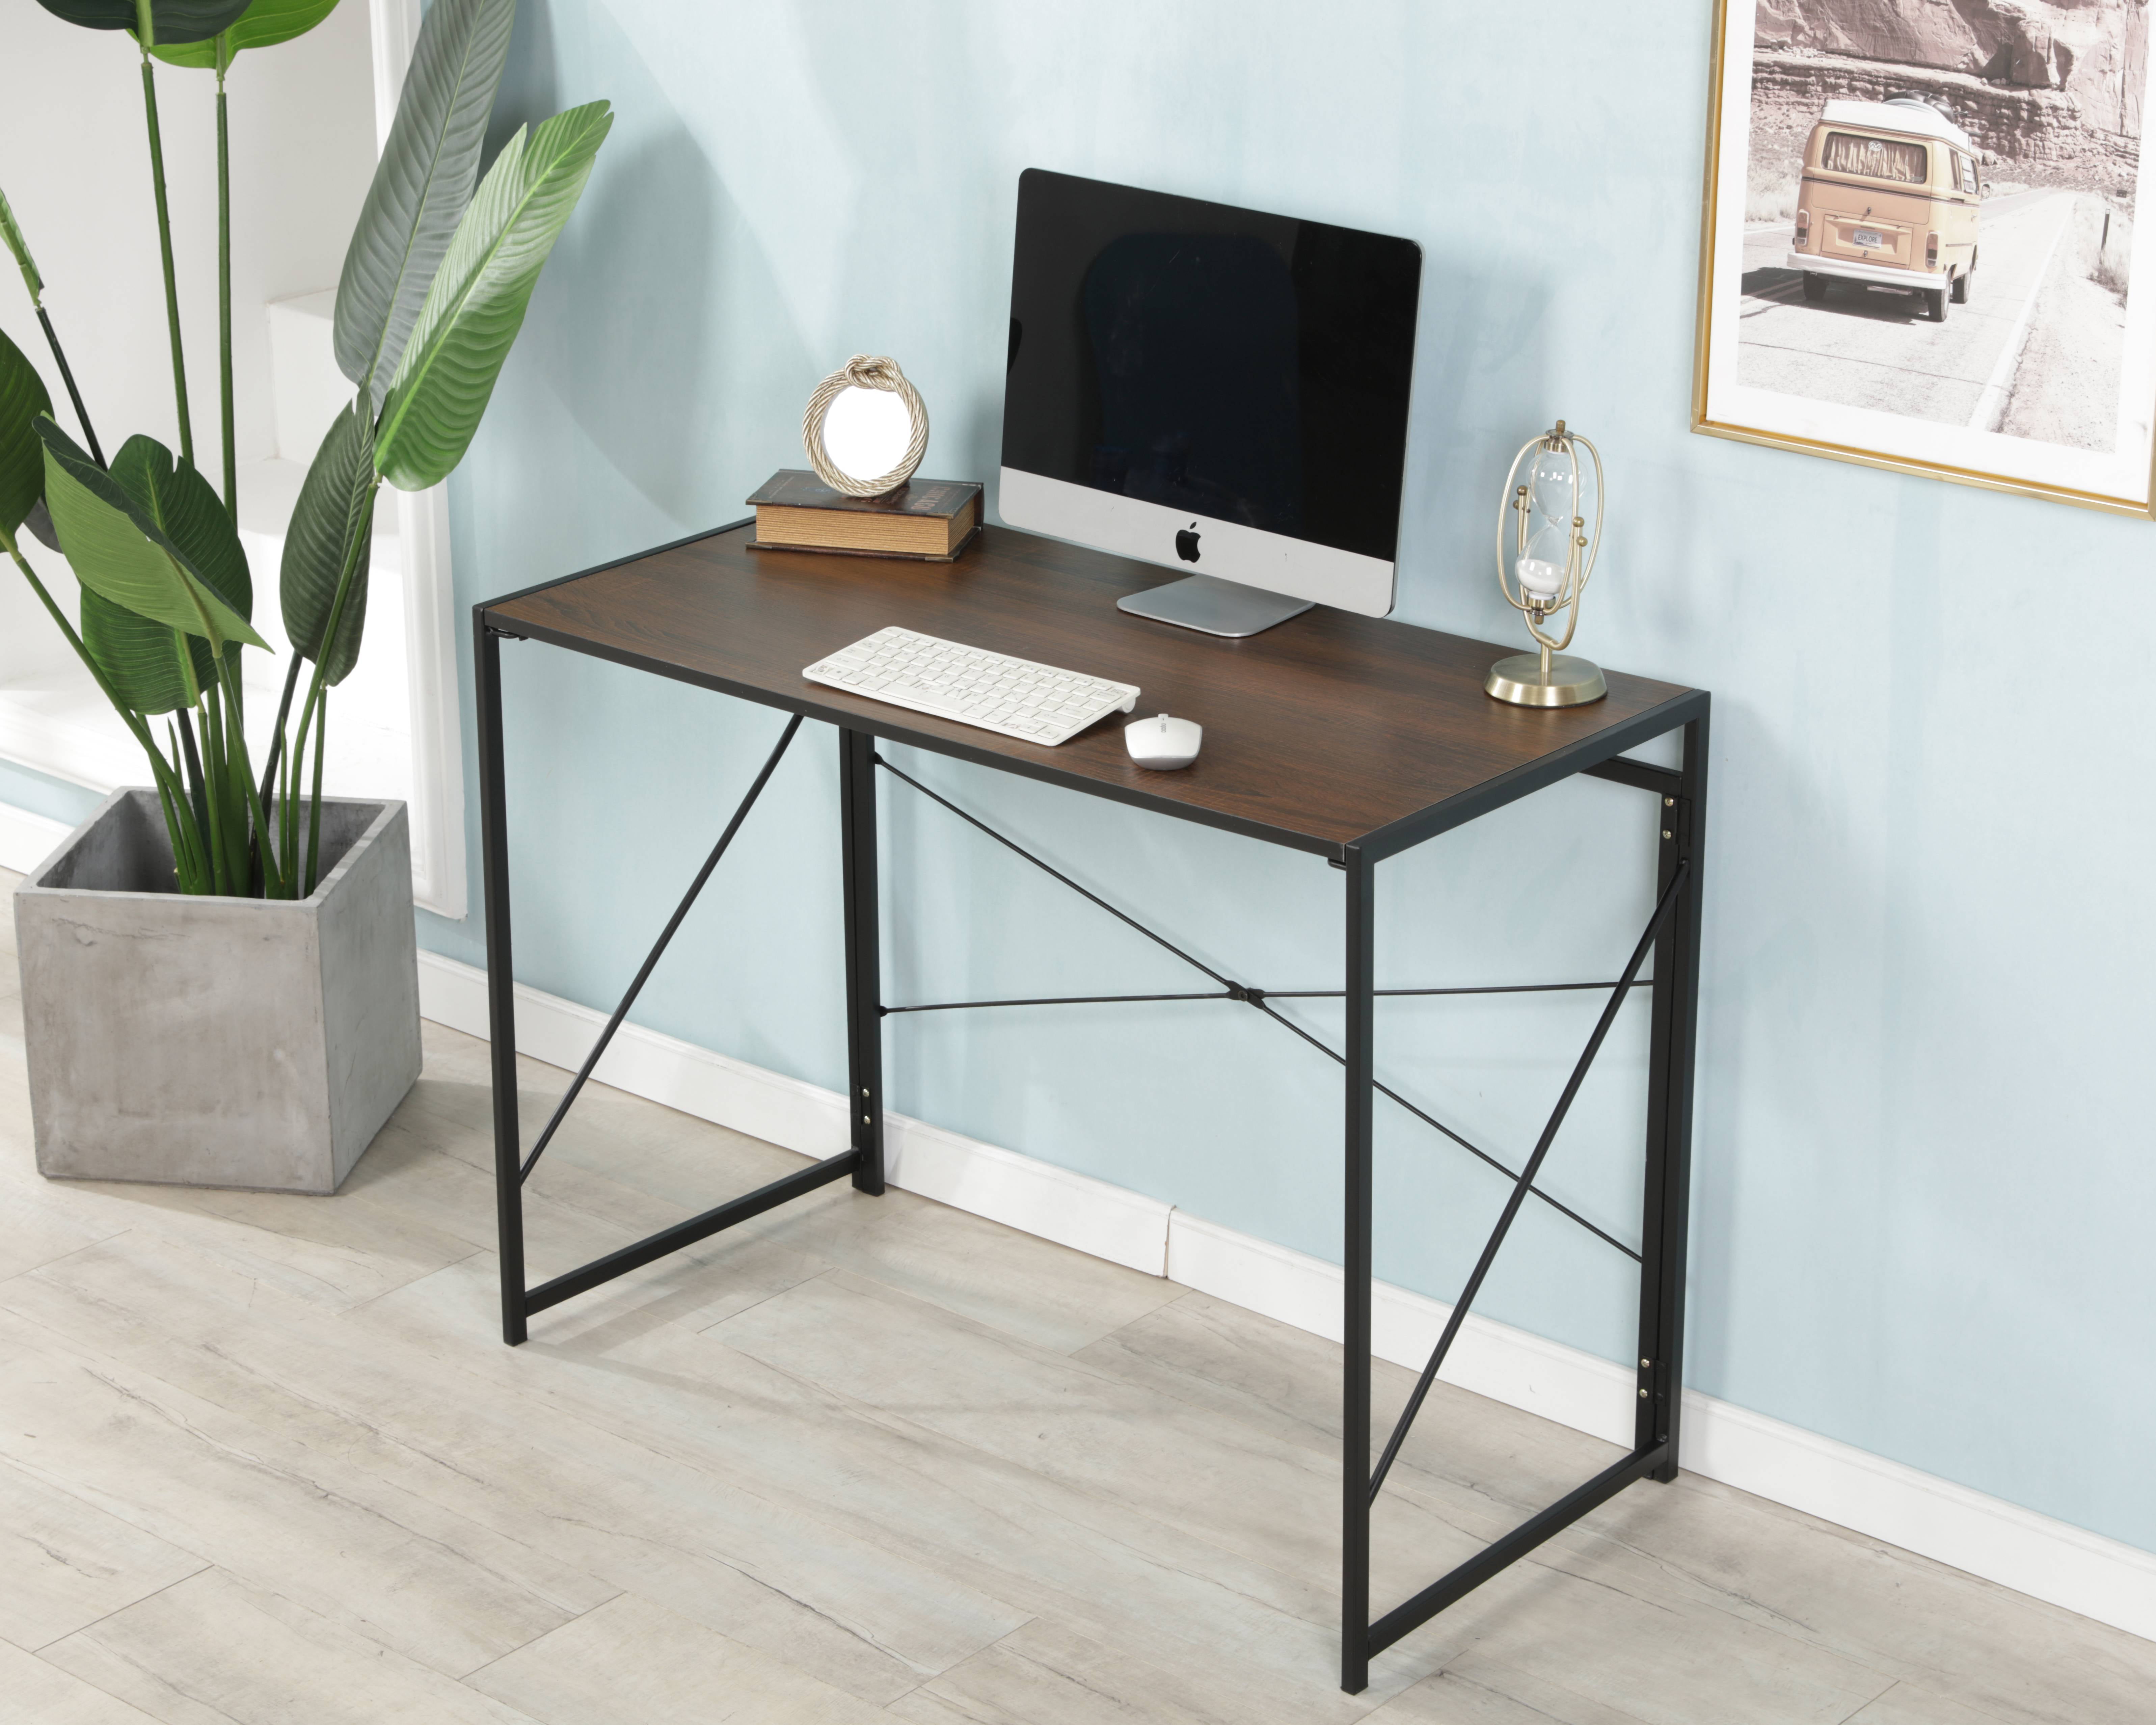 Small Living Room Ideas With Computer Desk